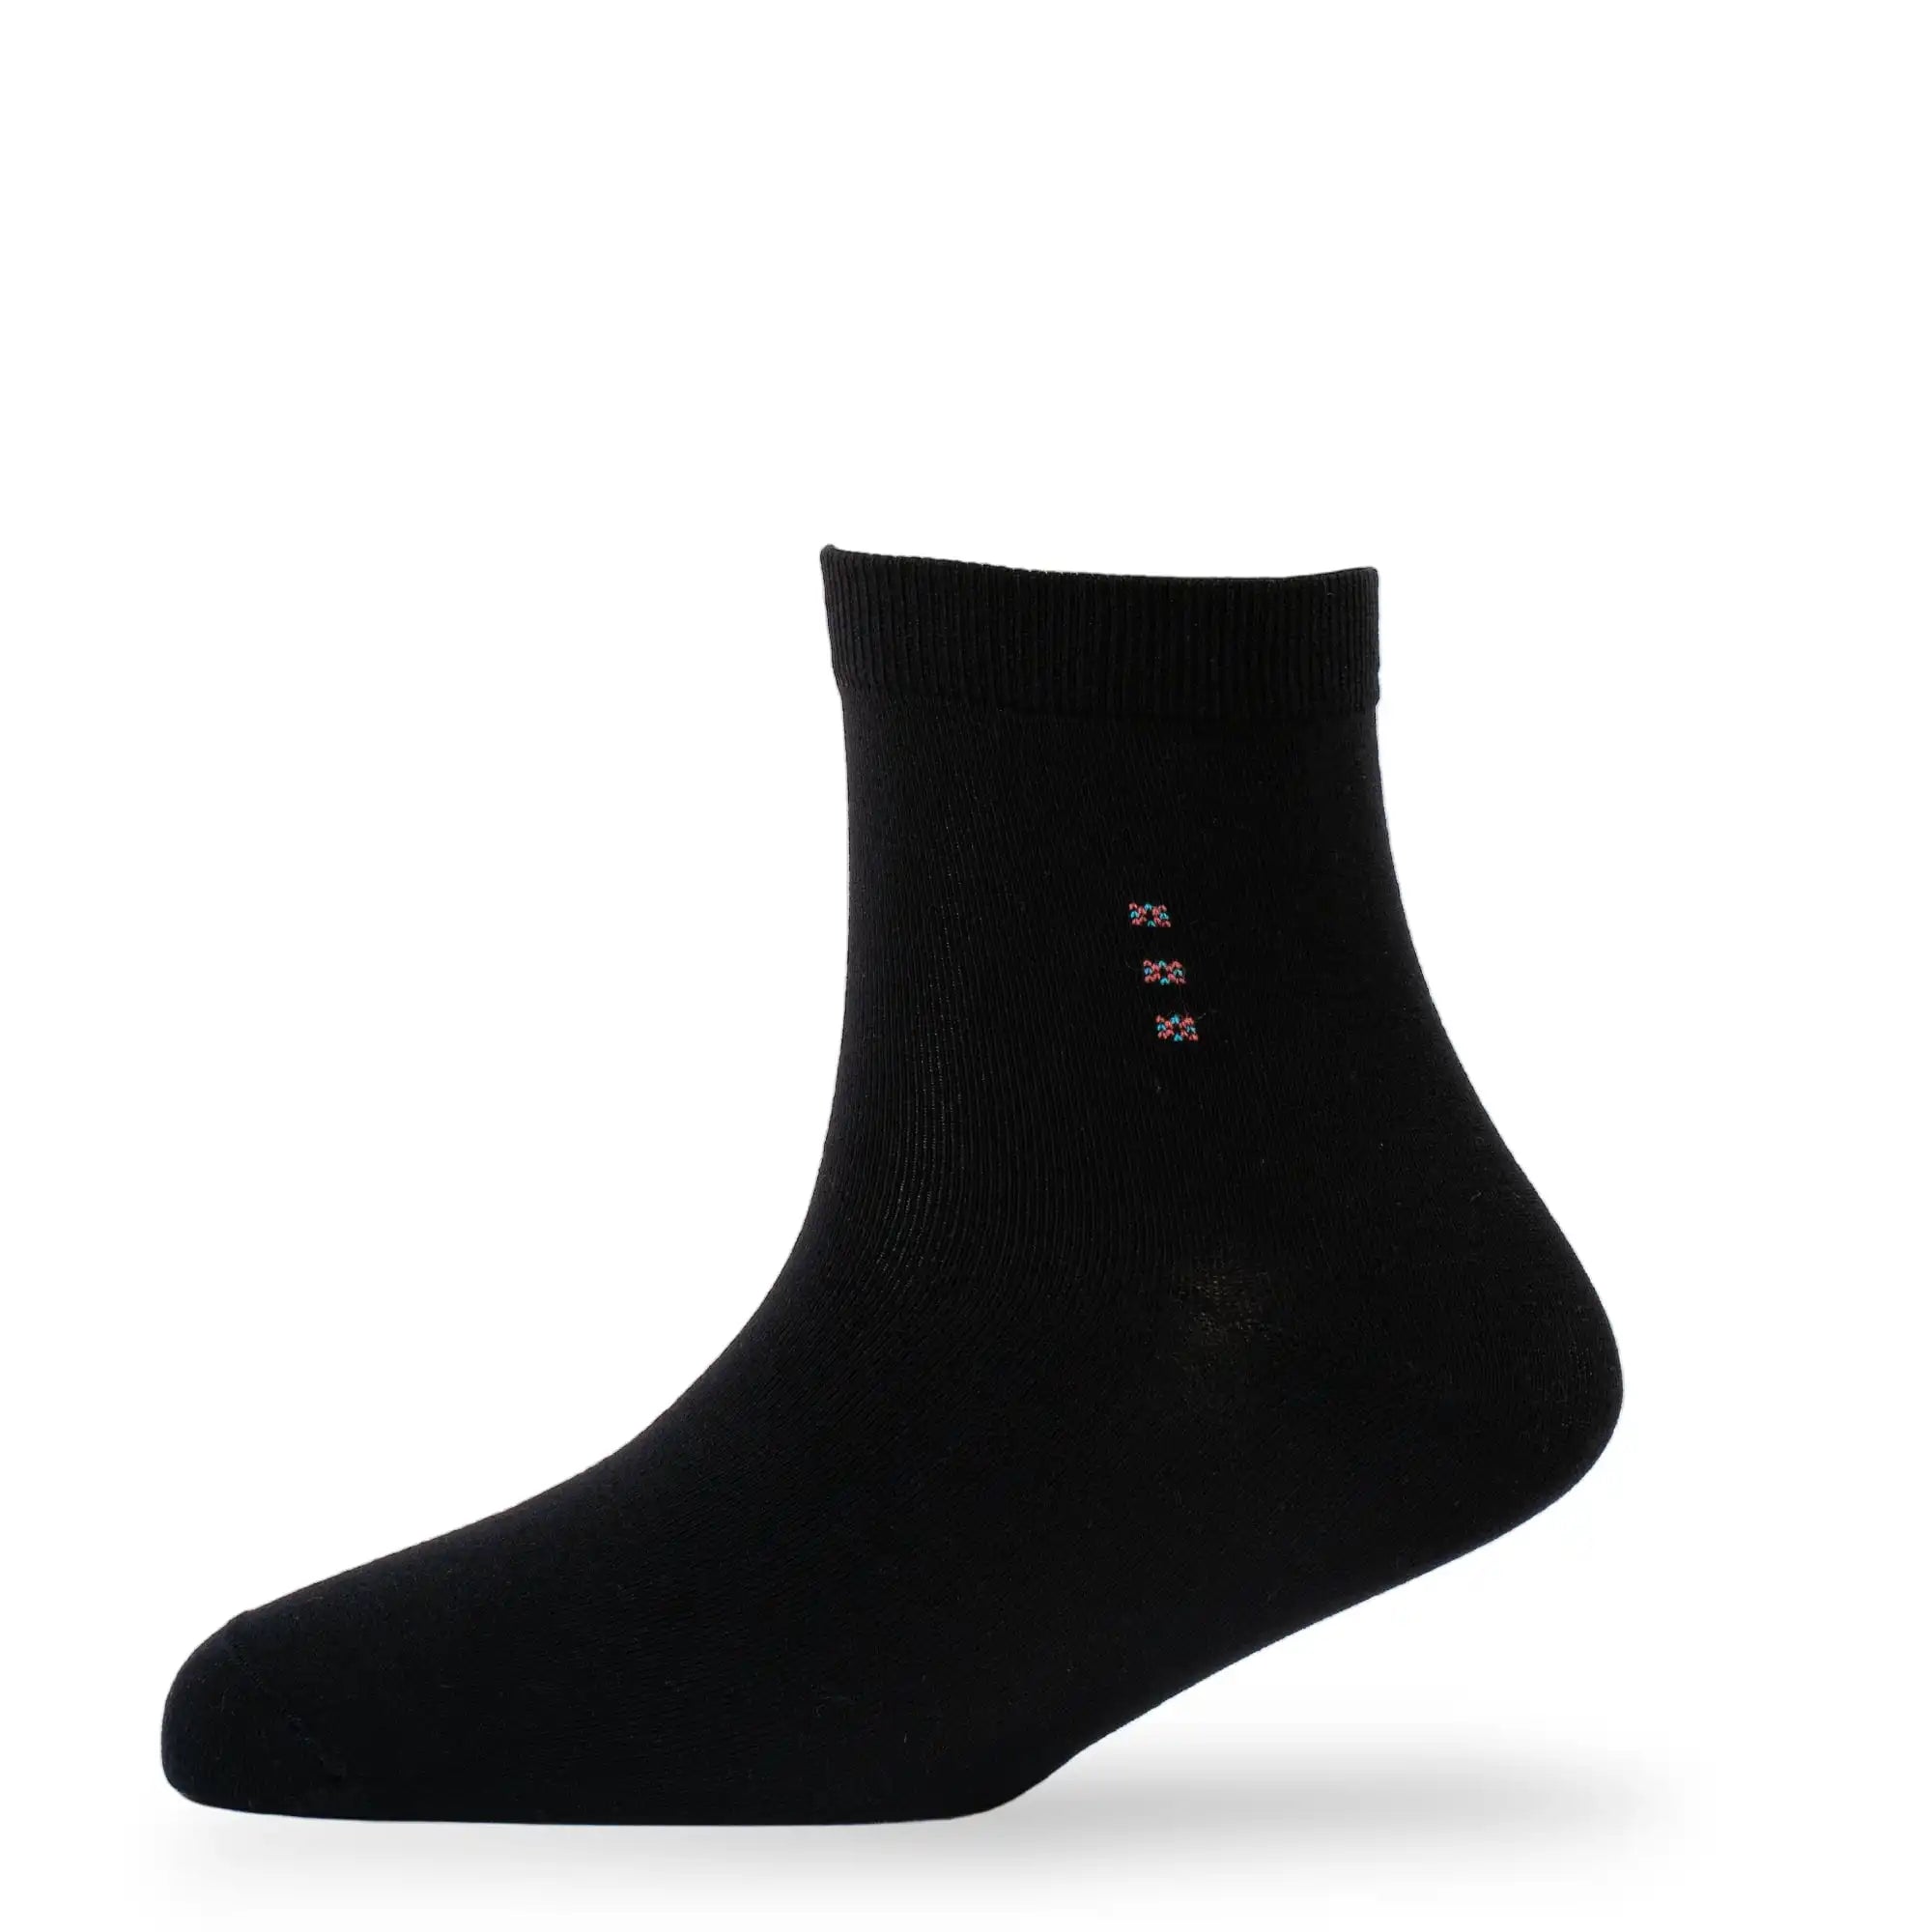 Young Wings Men's Multi Colour Cotton Fabric Solid Ankle Length Socks - Pack of 3, Style no. M1-2134 N